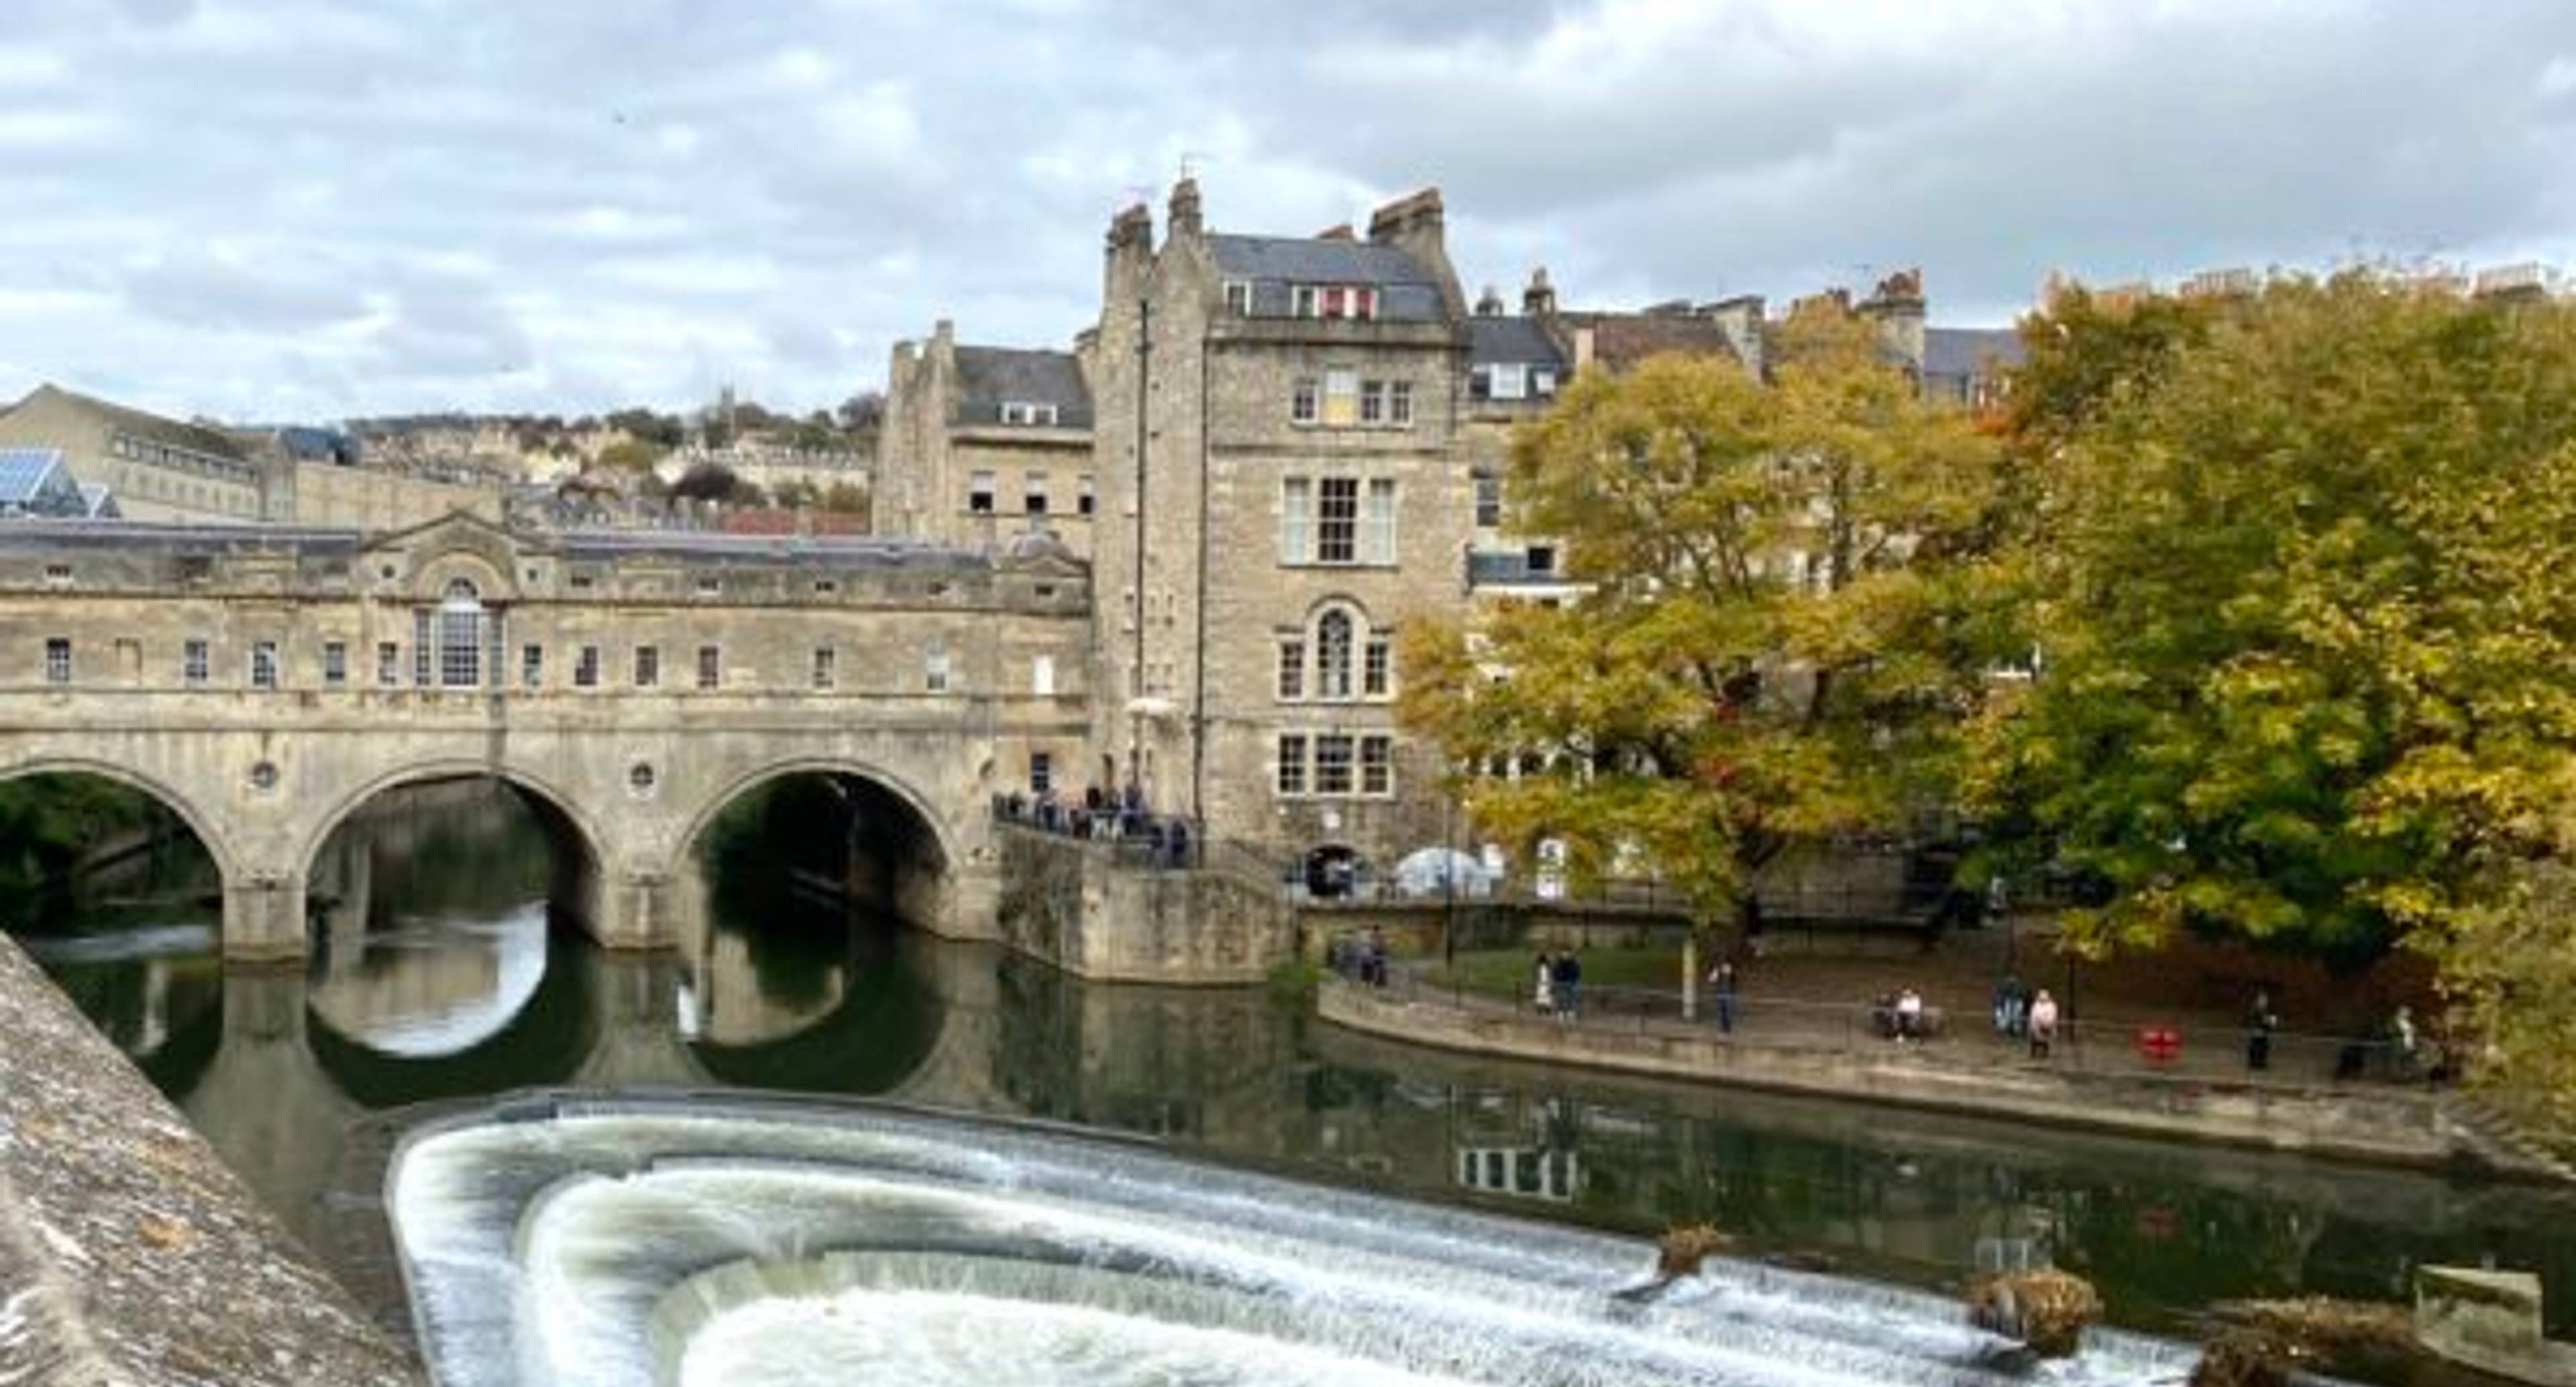 Bath and the Cotswolds. England's most beautiful village